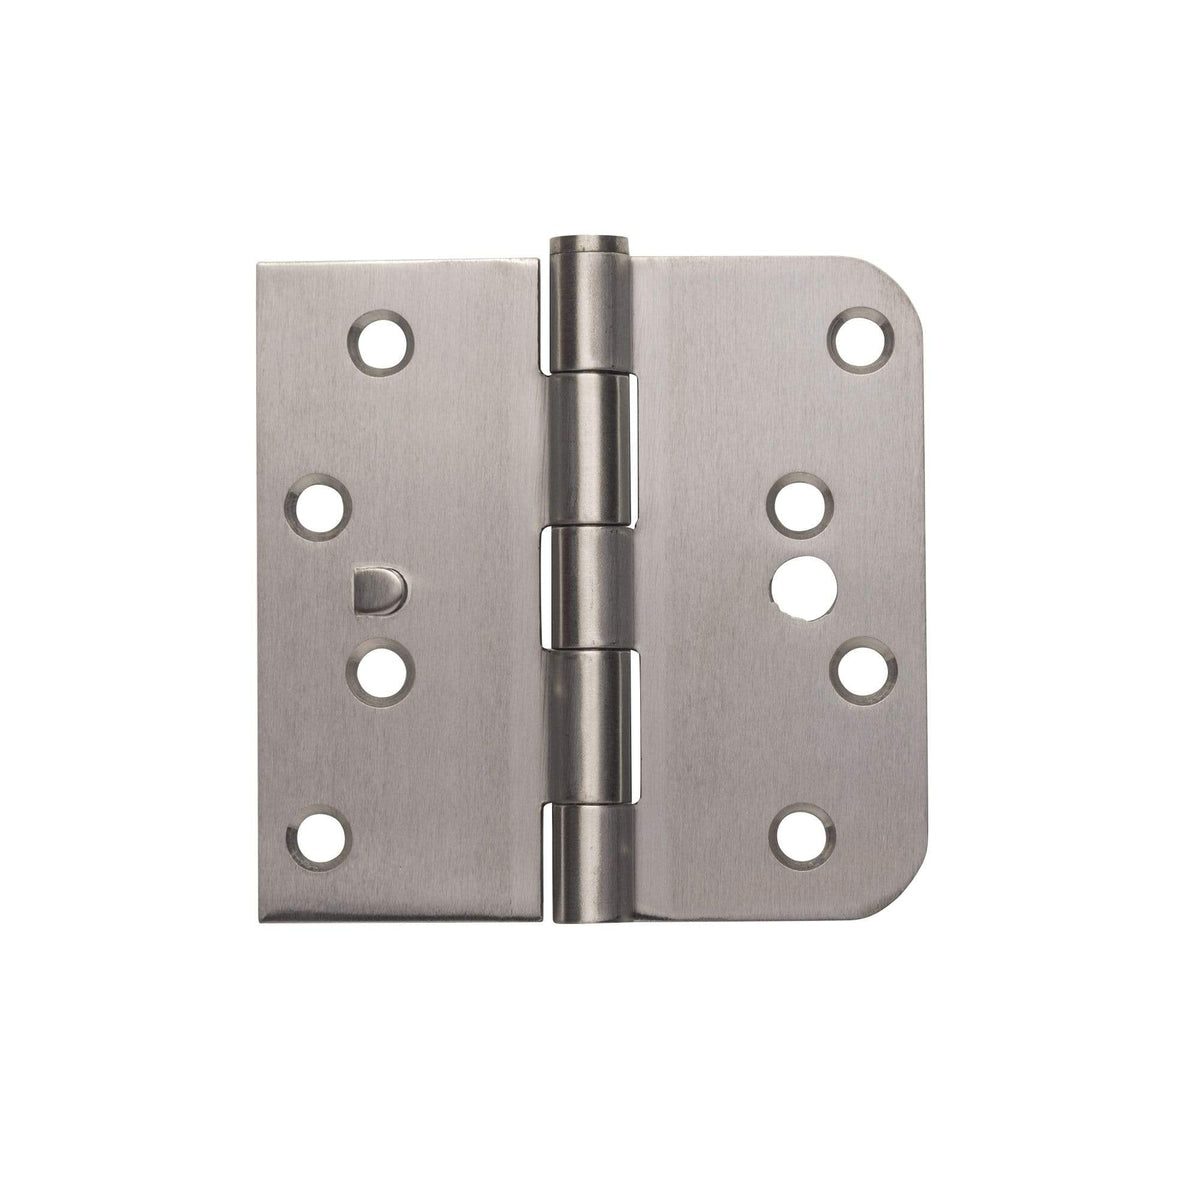 Stainless Steel Hinges With Security Tab - 4" X 4" Plain Bearing Hinge Square Corner With 5/8" Radius Corner - 2 Pack - Clearance